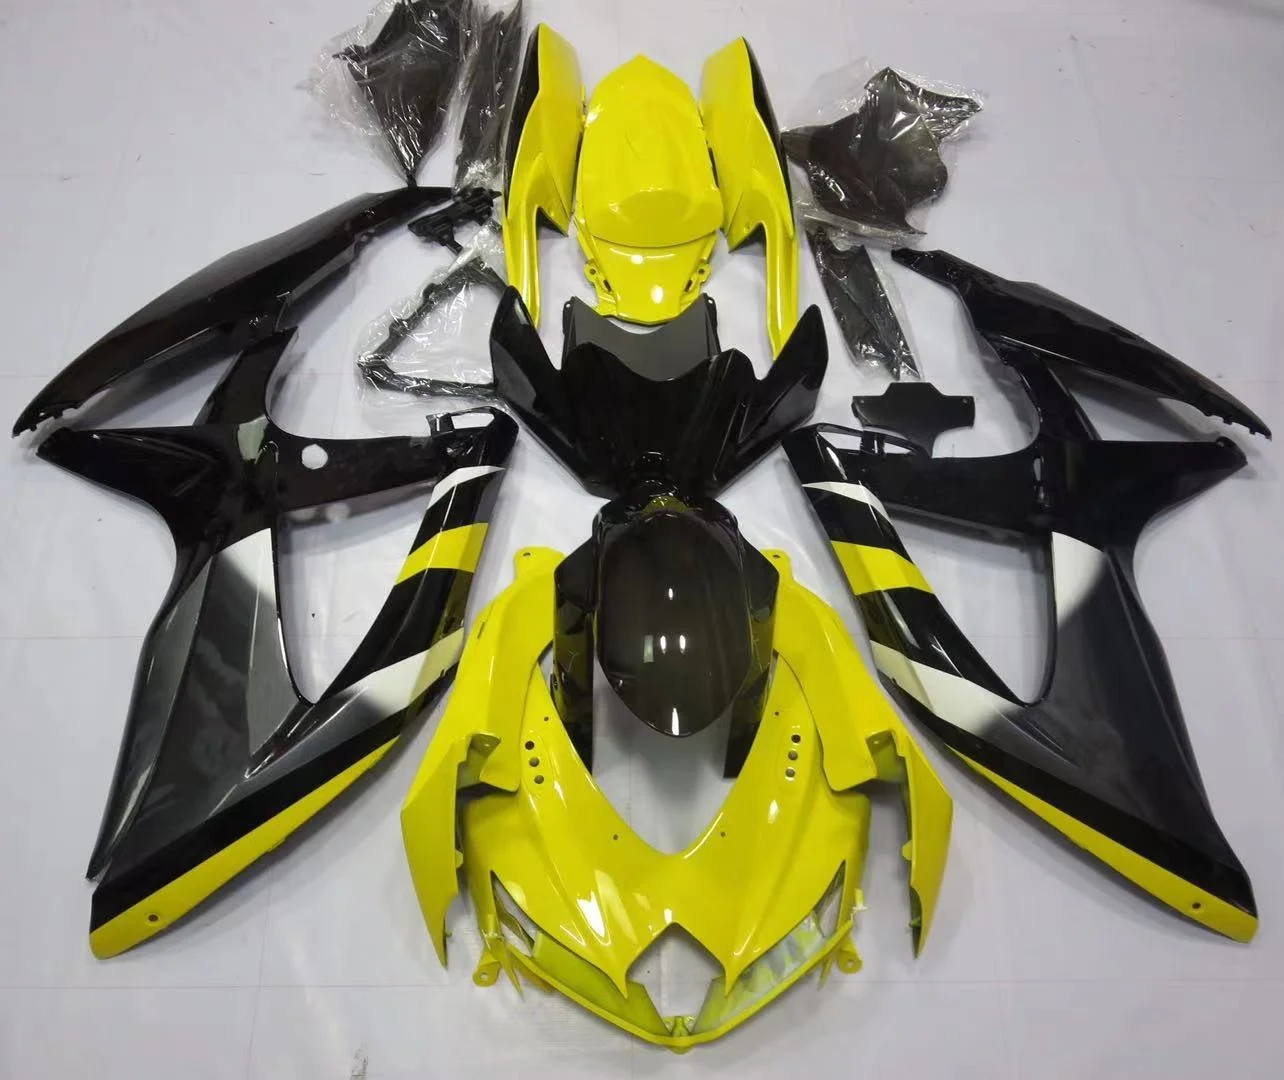 

2021 WHSC Motorcycle Fairings Fit For SUZUKI GSXR600-750 2008-2010 ABS Plastic Body Work Black Yellow, Pictures shown